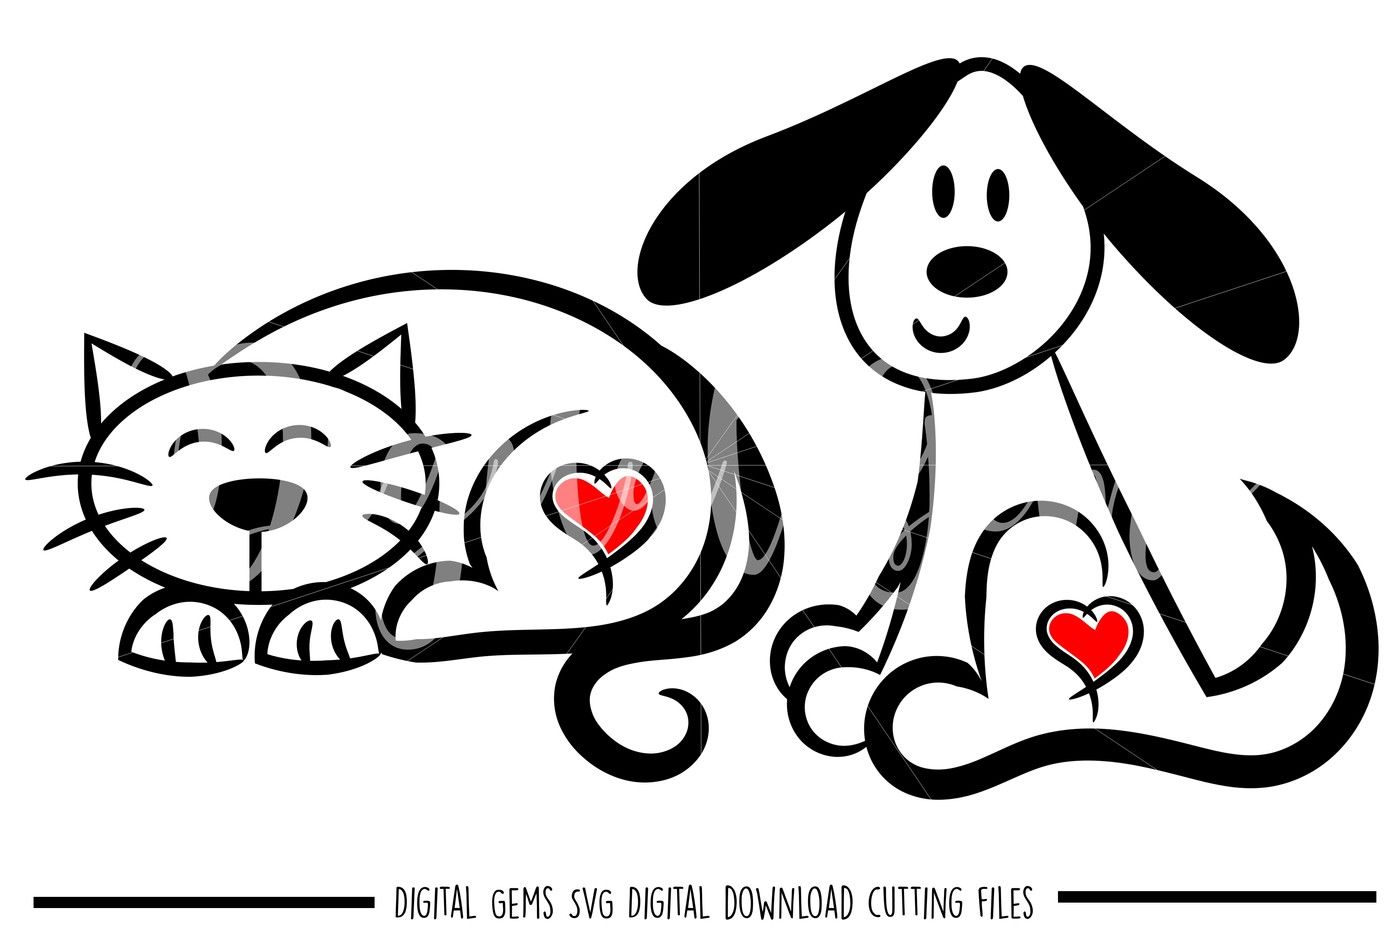 Dog and Cat SVG / DXF / PNG Files By Digital Gems | TheHungryJPEG